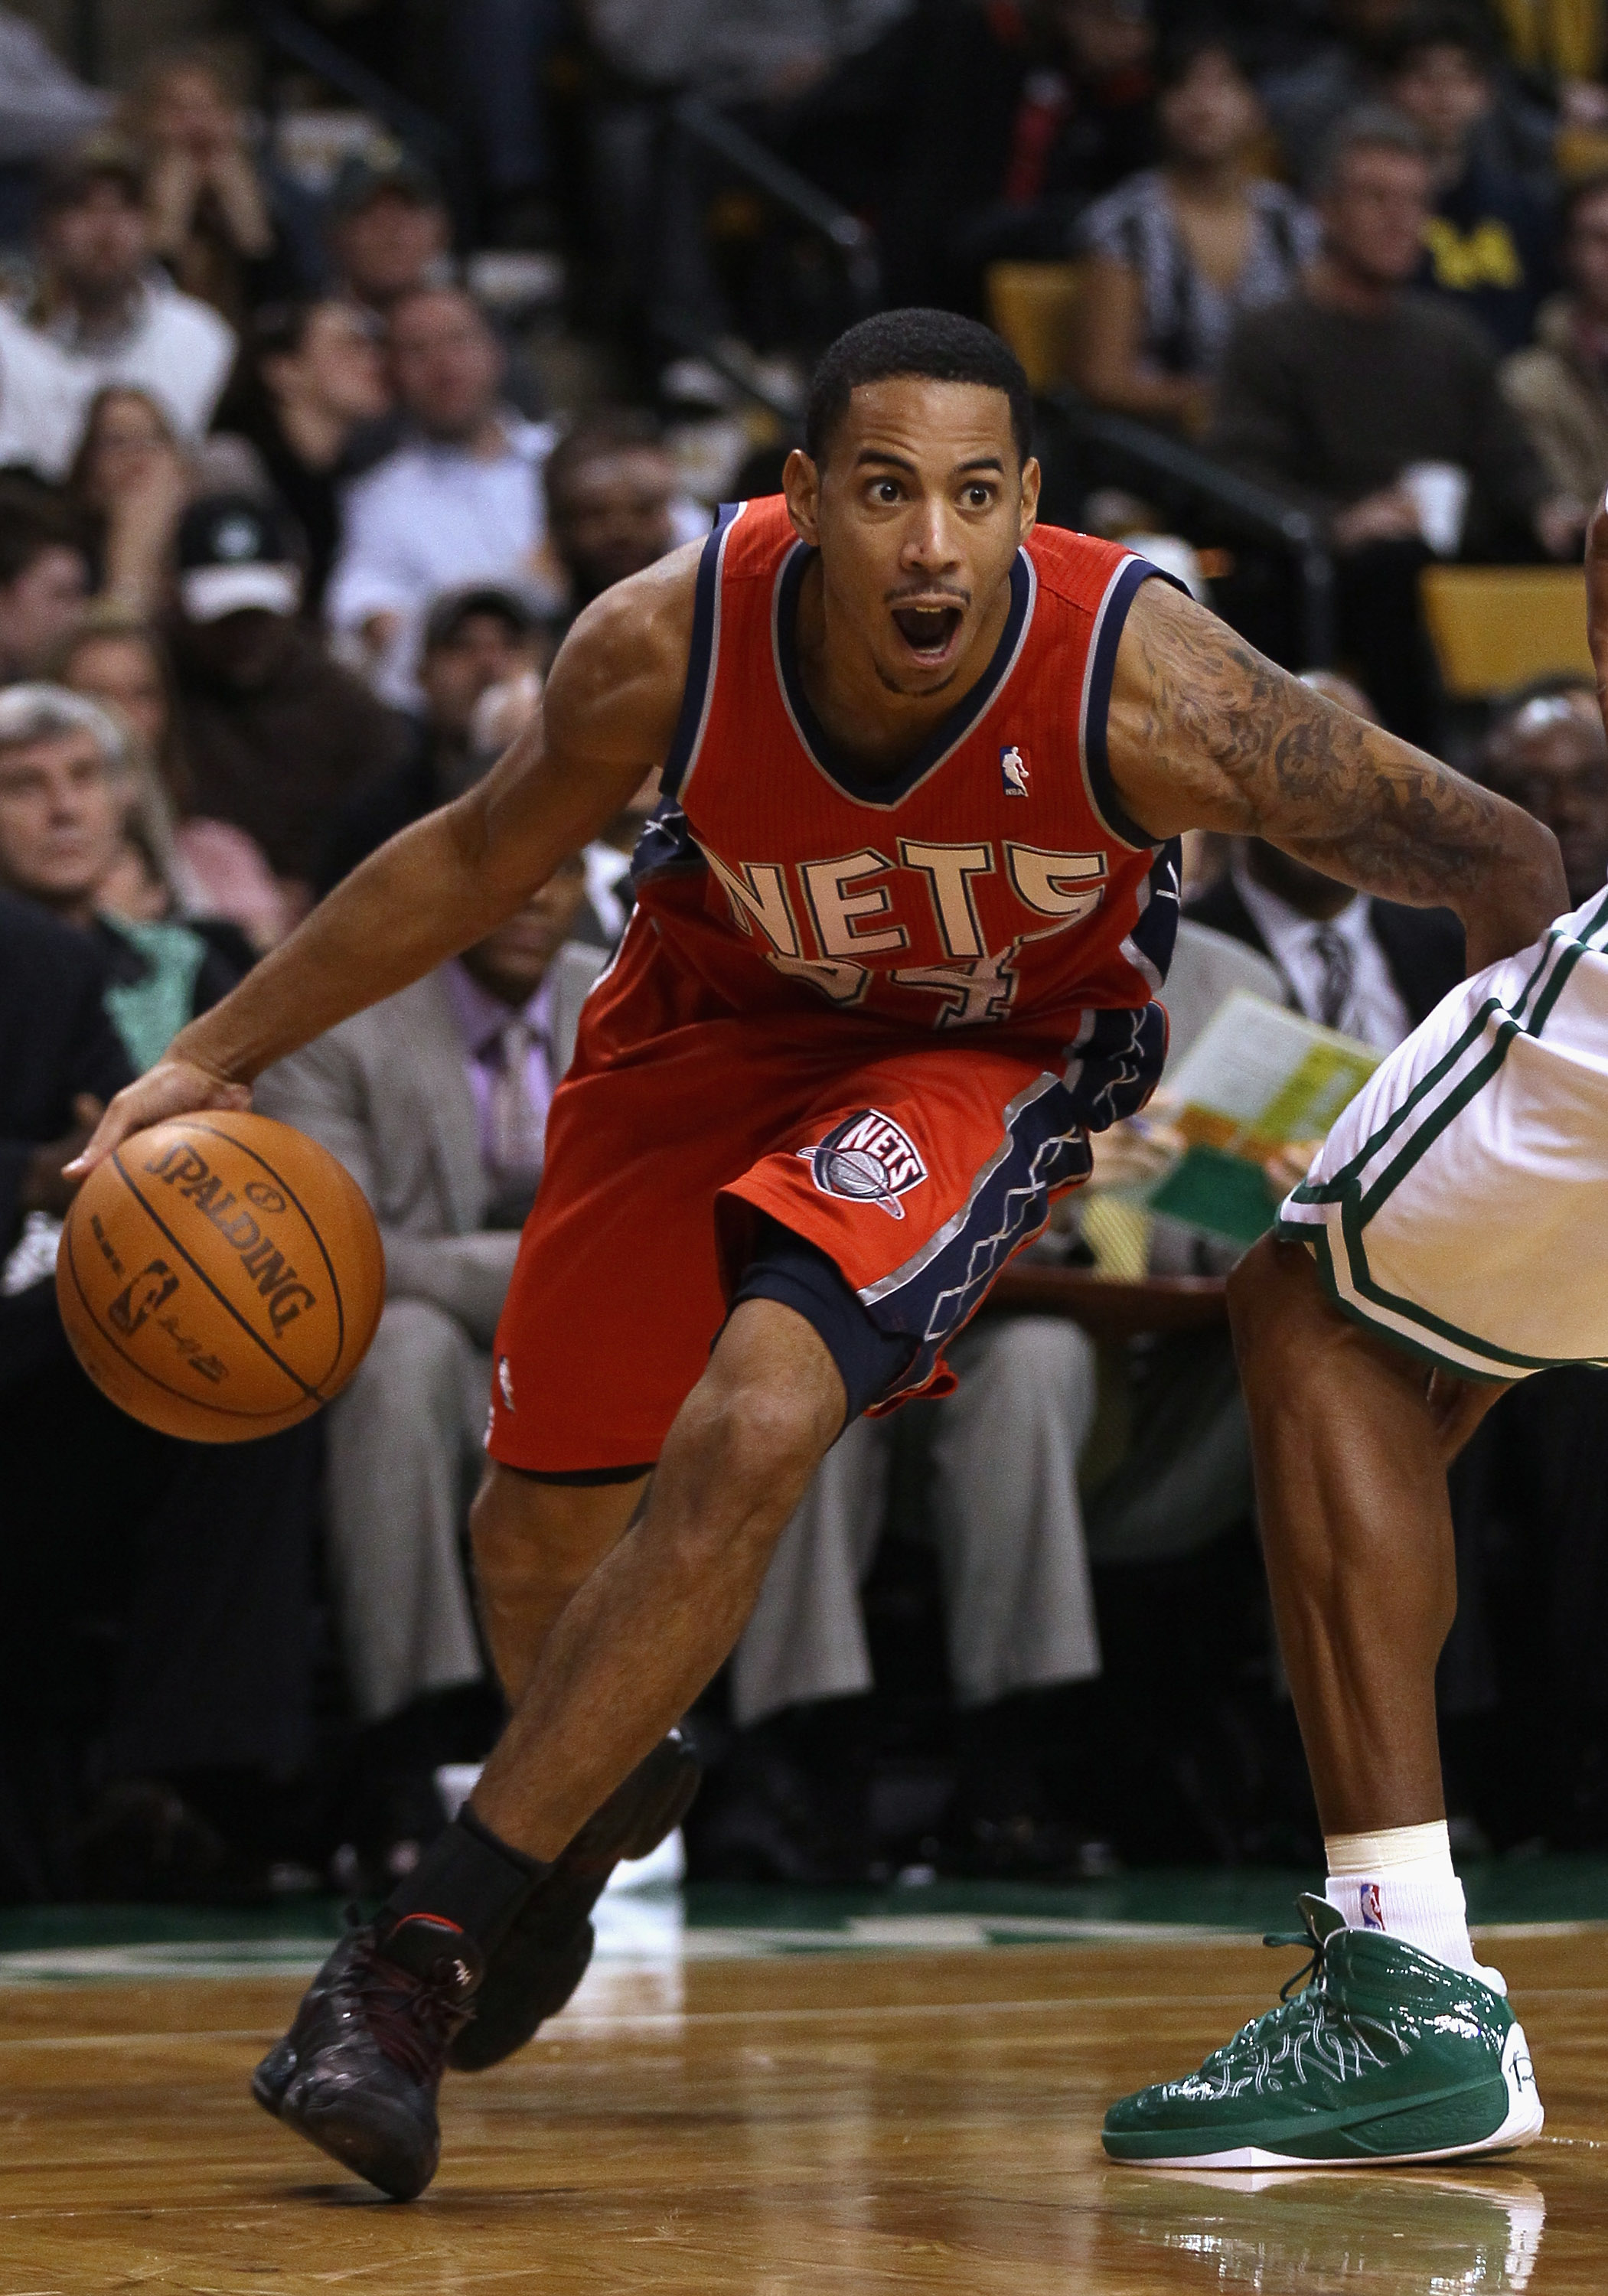 BOSTON - NOVEMBER 24:  Devin Harris #34 of the New Jersey Nets drives to the basket in the second half against the Boston Celtics on November 24, 2010 at the TD Garden in Boston, Massachusetts. The Celtics defeated the nets 89-83. NOTE TO USER: User expre